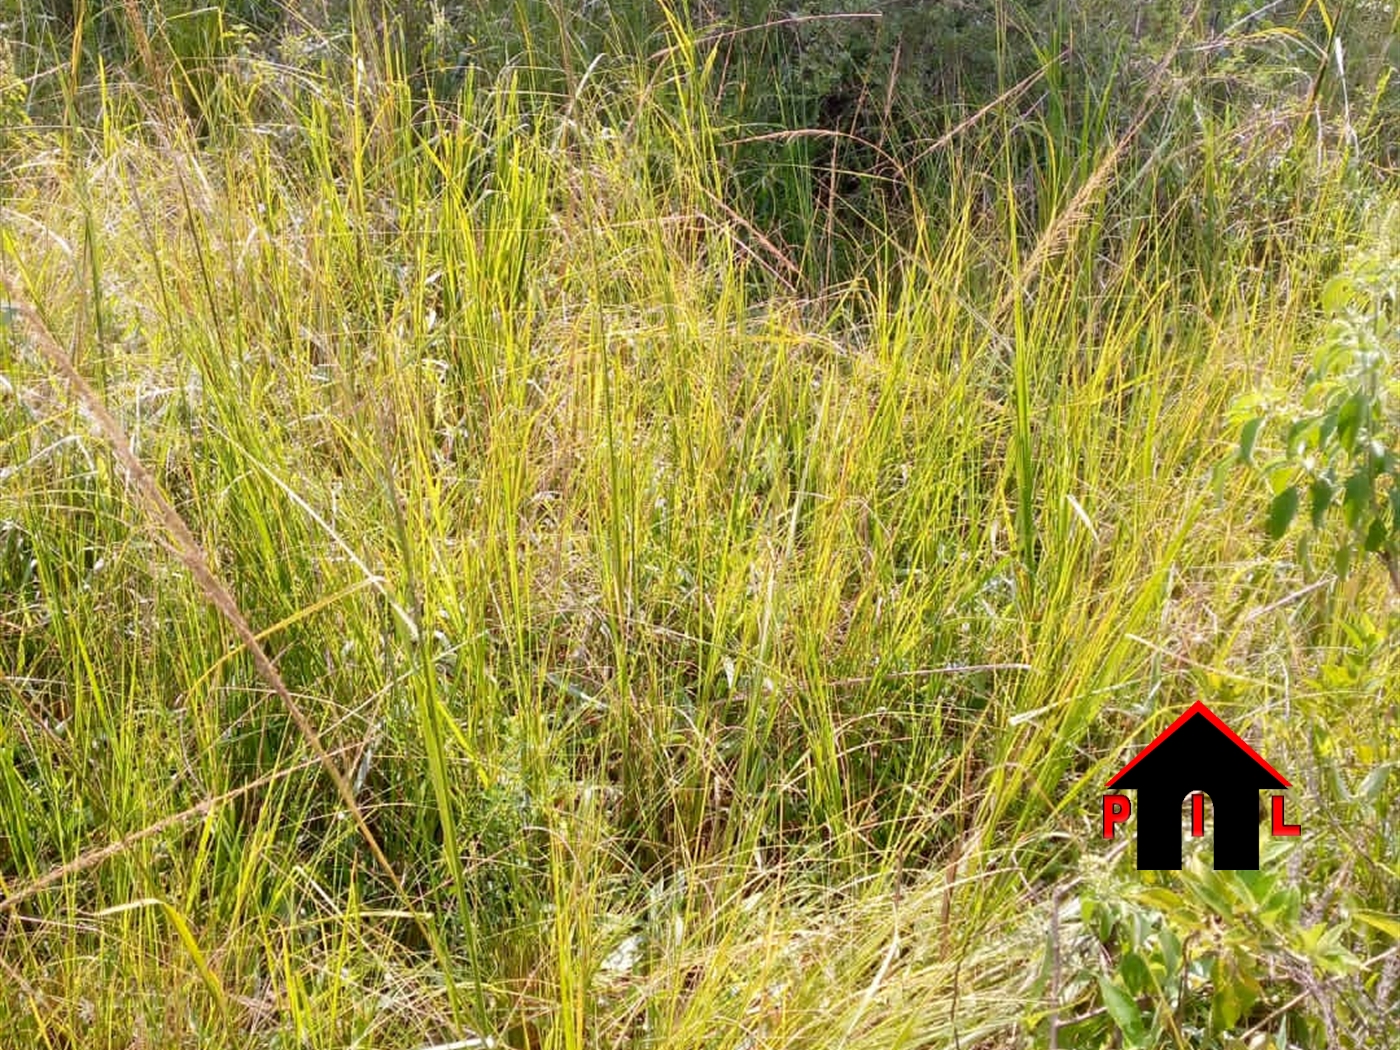 Residential Land for sale in Kauga Mukono